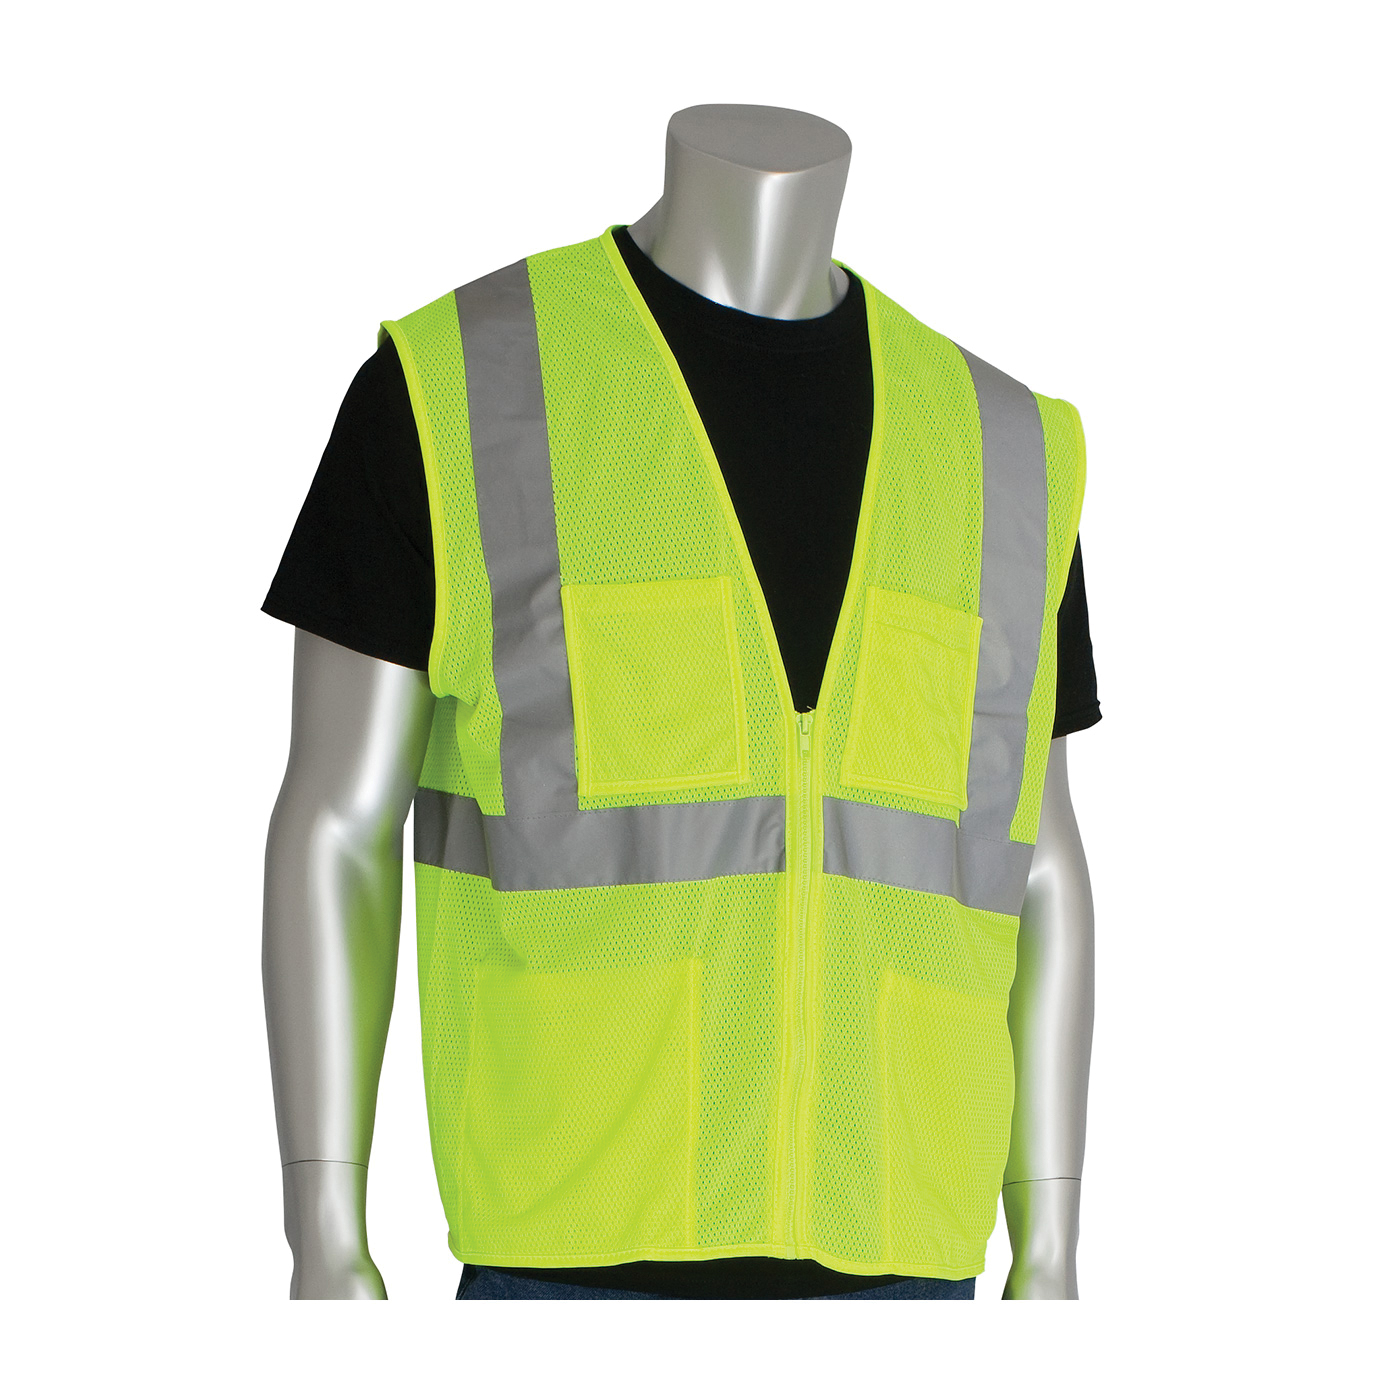 PIP® 302-MVGZ4PLY-S Safety Vest, S, Hi-Viz Lime Yellow, Polyester Mesh, Zipper Closure, 4 Pockets, ANSI Class: Class 2, Specifications Met: ANSI 107 Type R